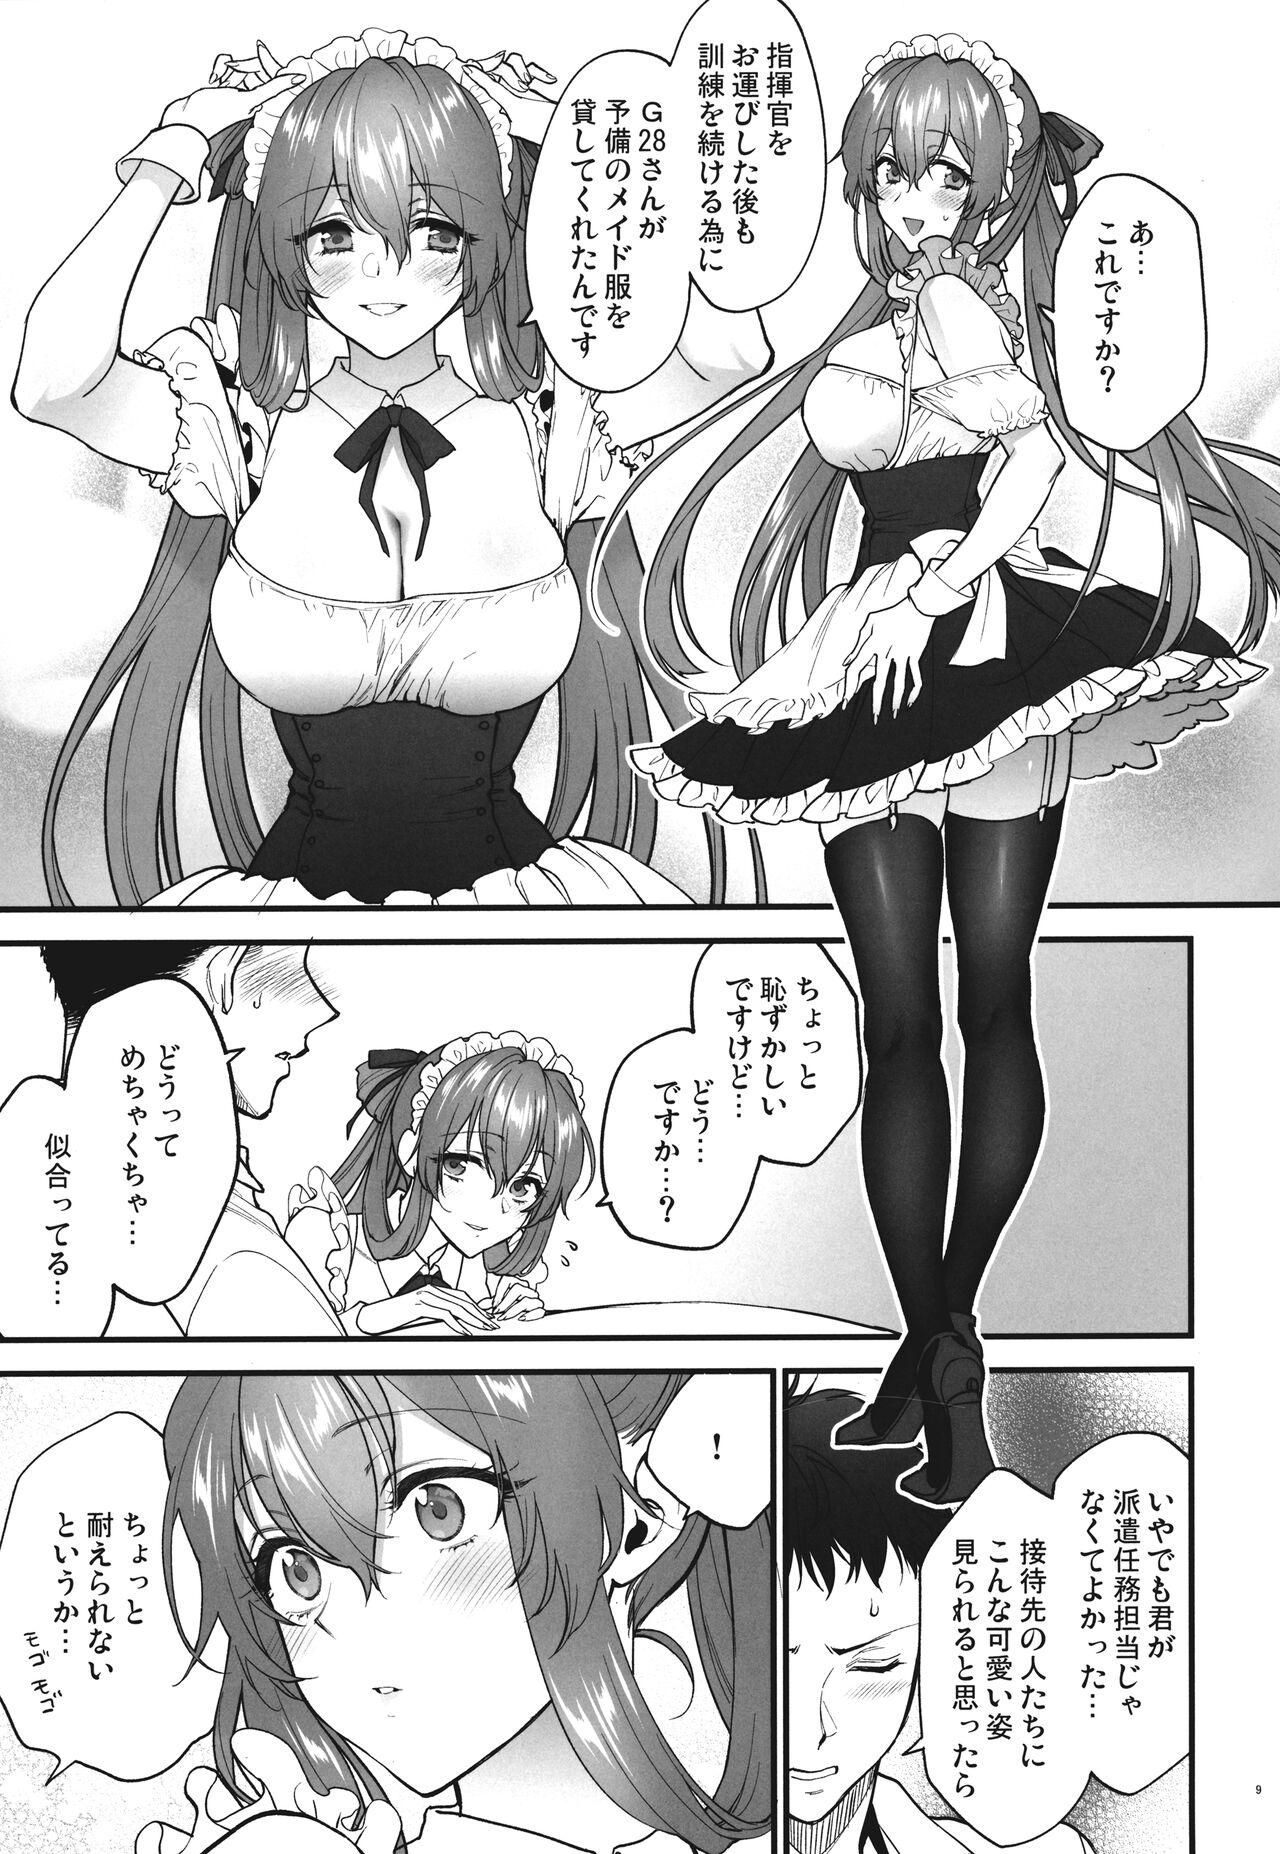 Lady Make me Yours - Girls frontline Hard Cock - Page 8